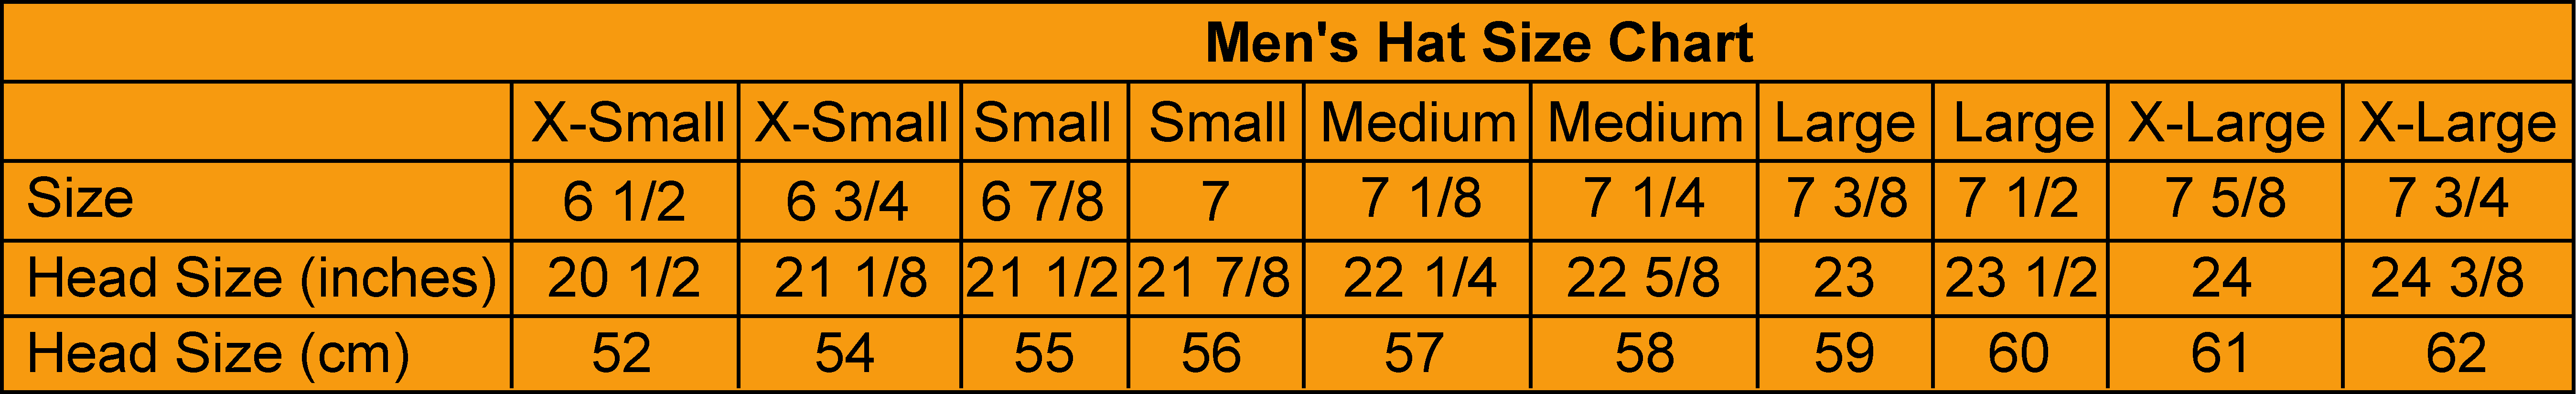 Men's hat size chart in inches and centimeters